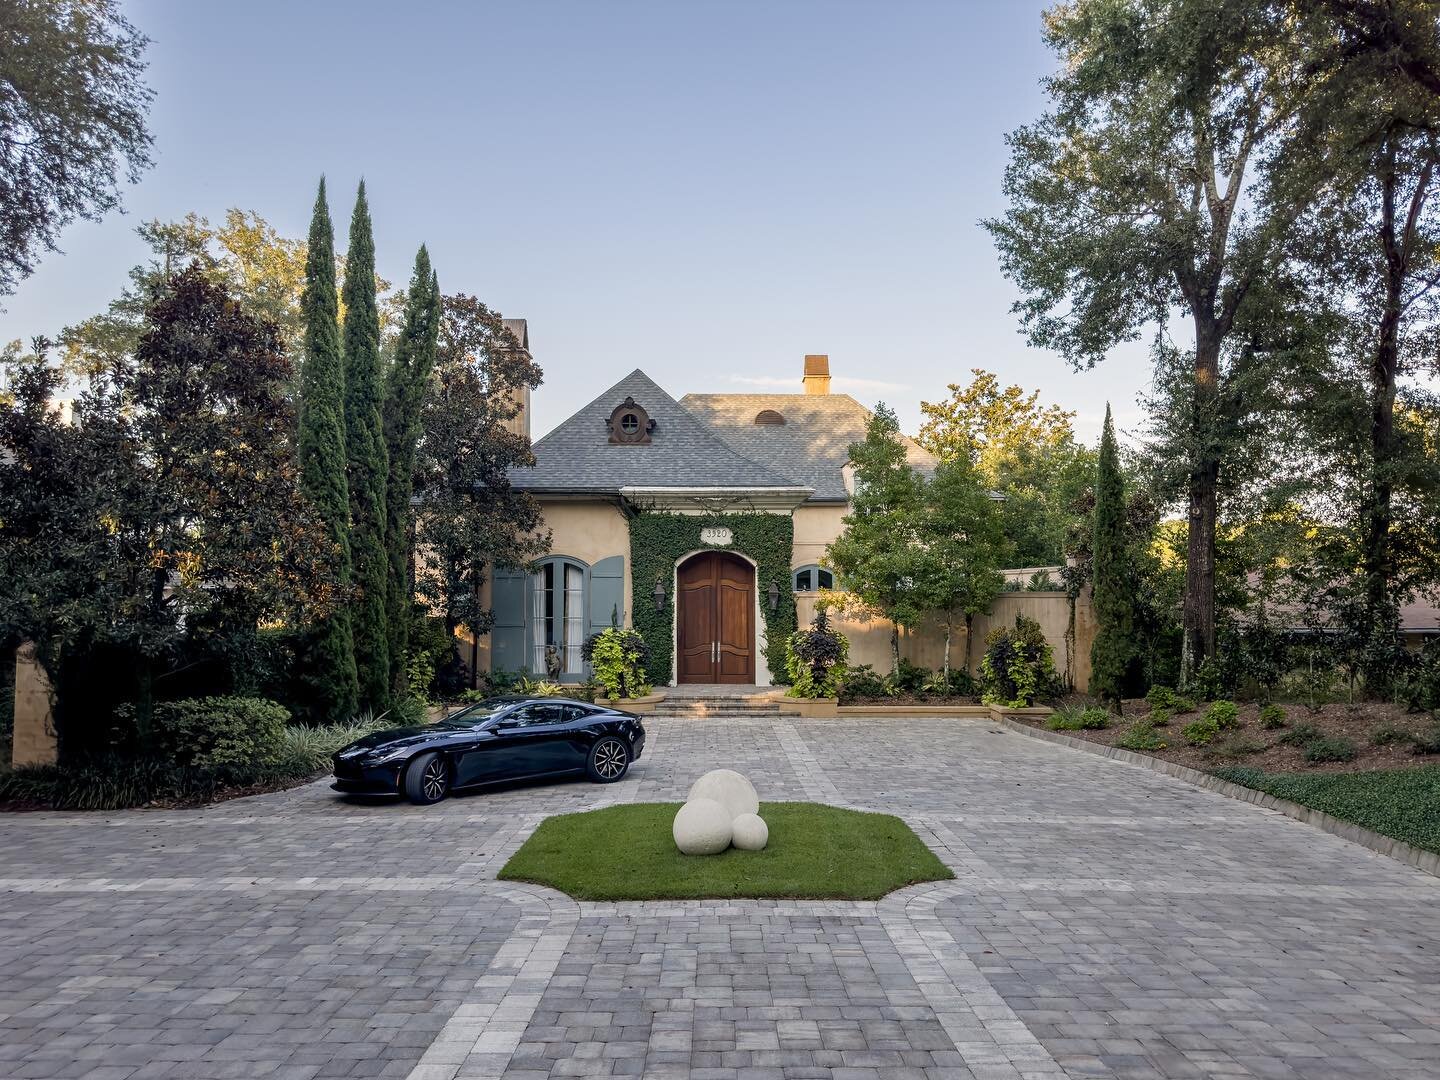 Truly an architectural masterpiece for the most discriminating buyer, the timeless elegance and attention to detail at 3920 Menendez begins at the paver driveway and dramatic 12&rsquo; cypress entrance door leading into a private New Orleans style co